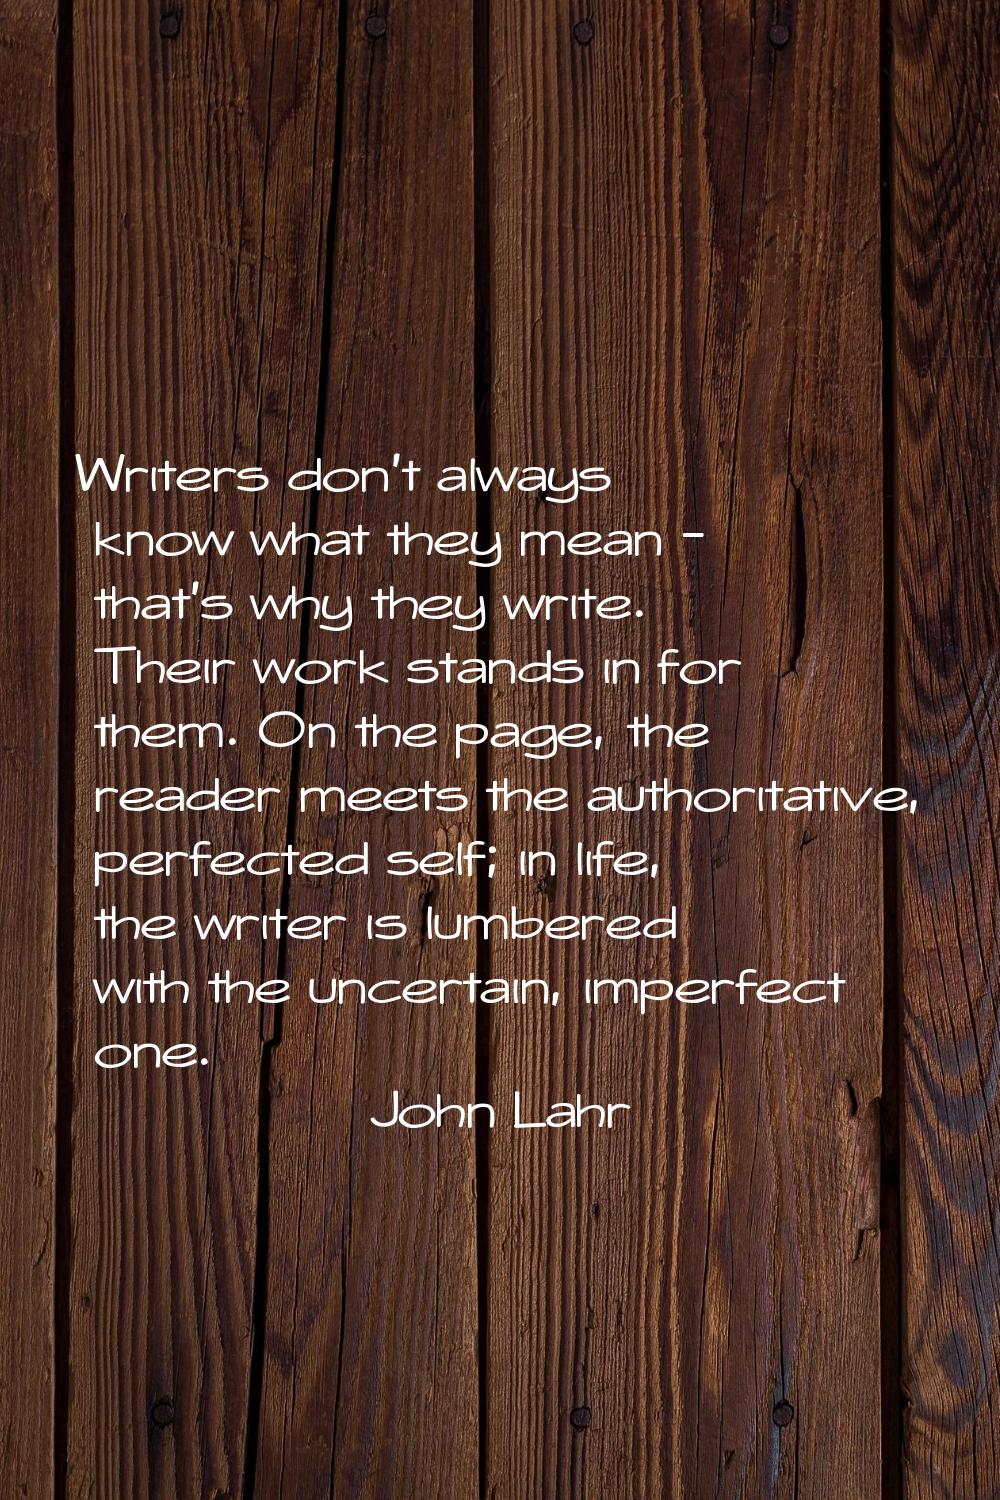 Writers don't always know what they mean - that's why they write. Their work stands in for them. On